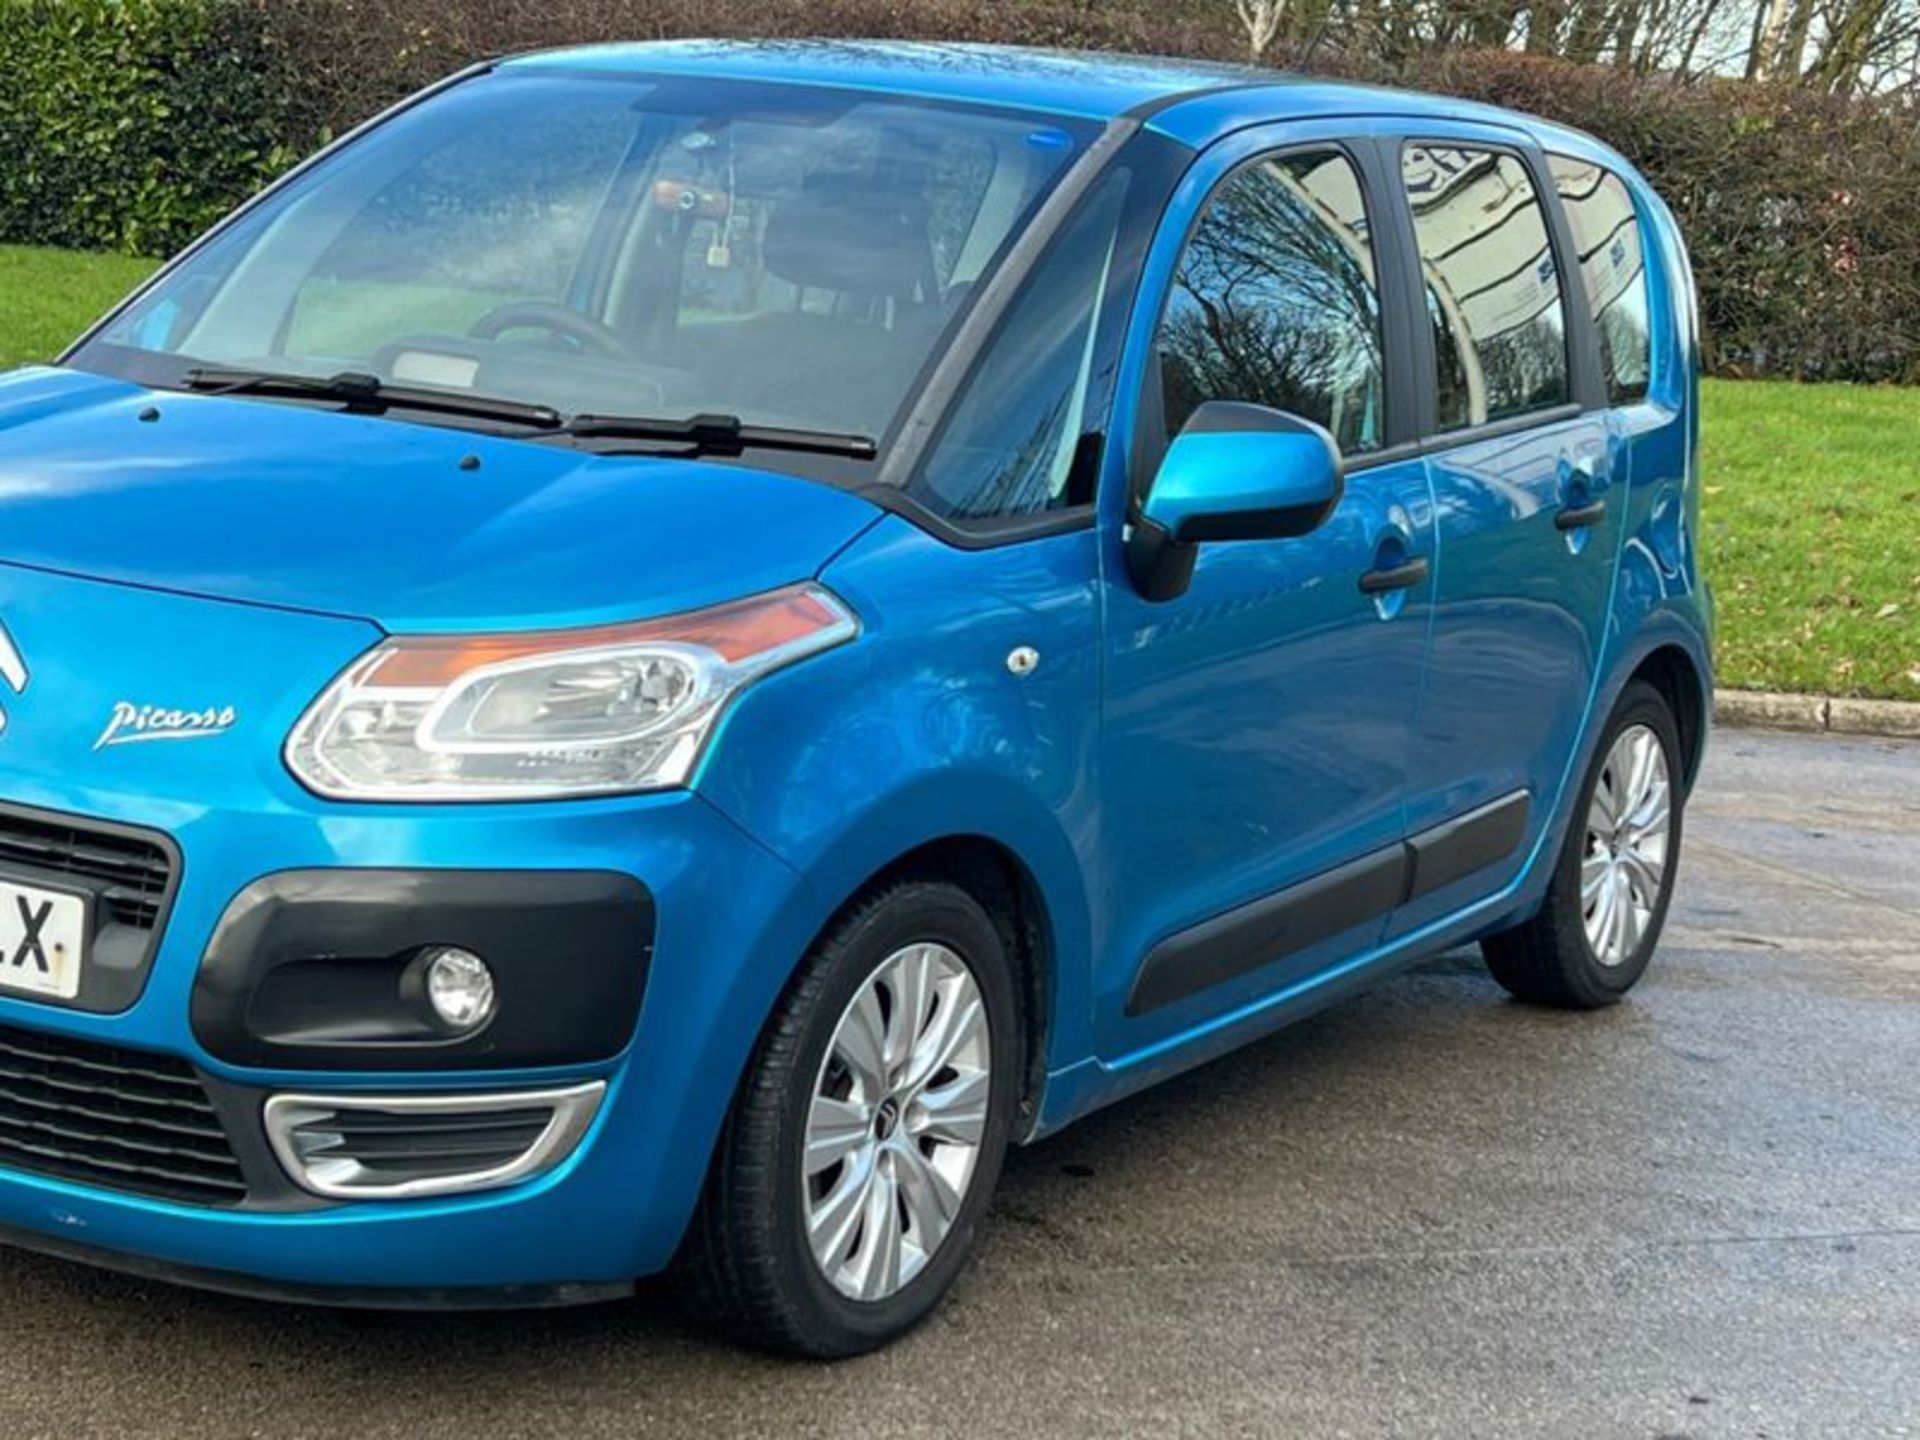 CITROEN C3 PICASSO 1.4 VTI VTR+ EURO 4 5DR 2009 (09 REG) - SPARES AND REPAIRS - Image 15 of 53